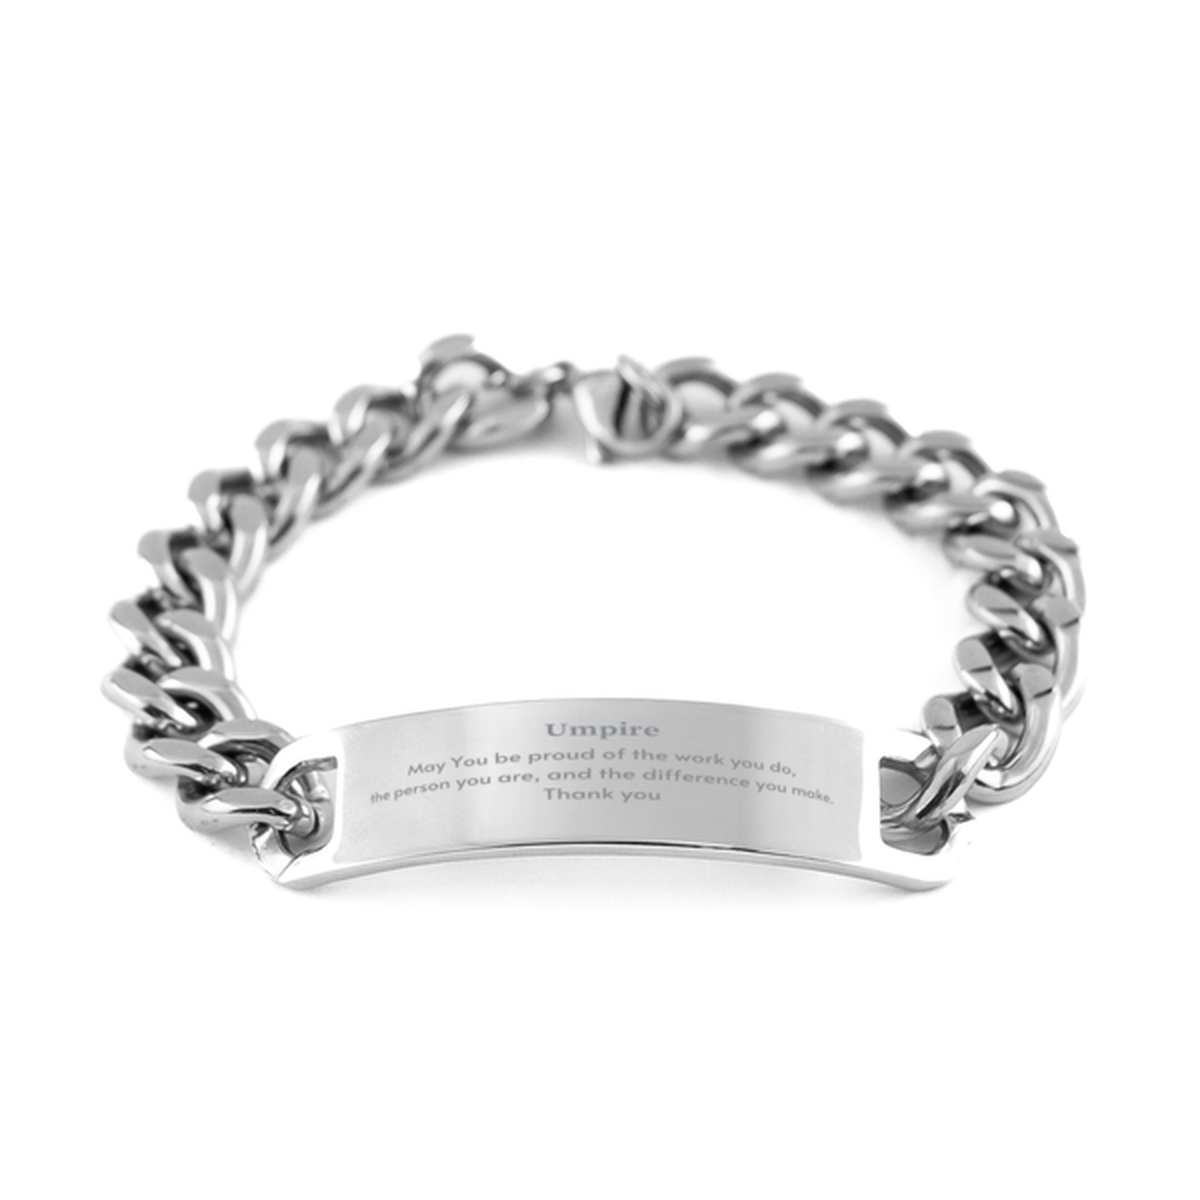 Heartwarming Cuban Chain Stainless Steel Bracelet Retirement Coworkers Gifts for Umpire, Umpire May You be proud of the work you do, the person you are Gifts for Boss Men Women Friends